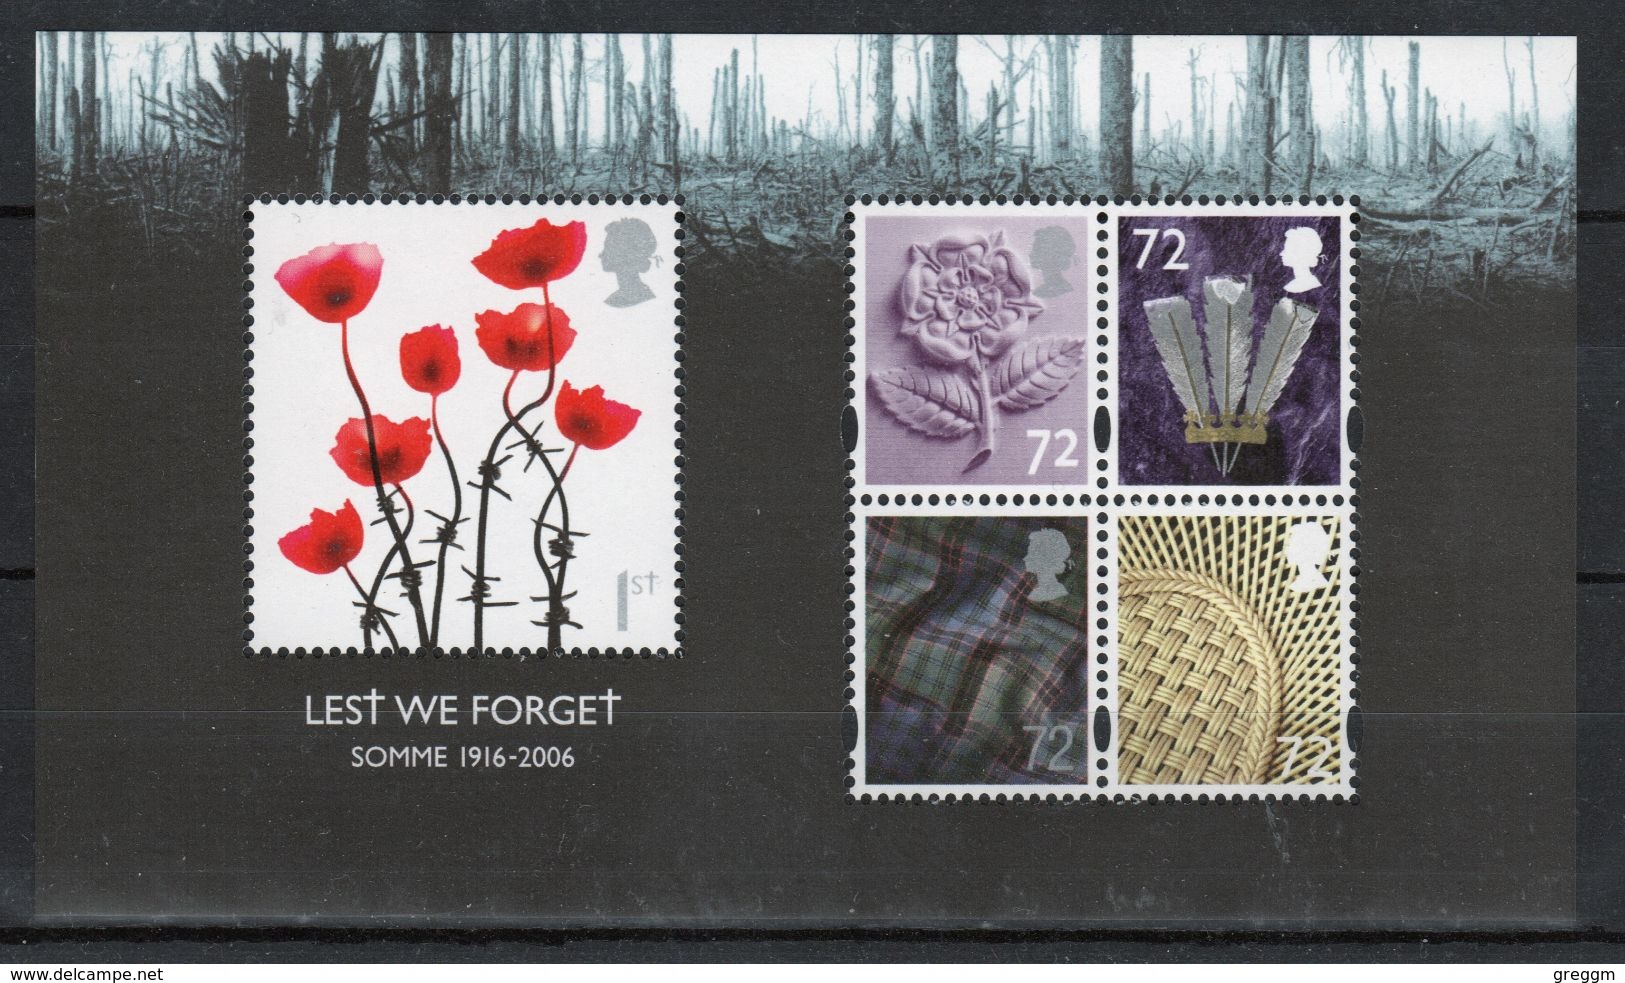 GB 2006 Mini Sheet Celebrating Lest We Forget 1st Issue Unmounted Mint Condition. - Blocks & Miniature Sheets